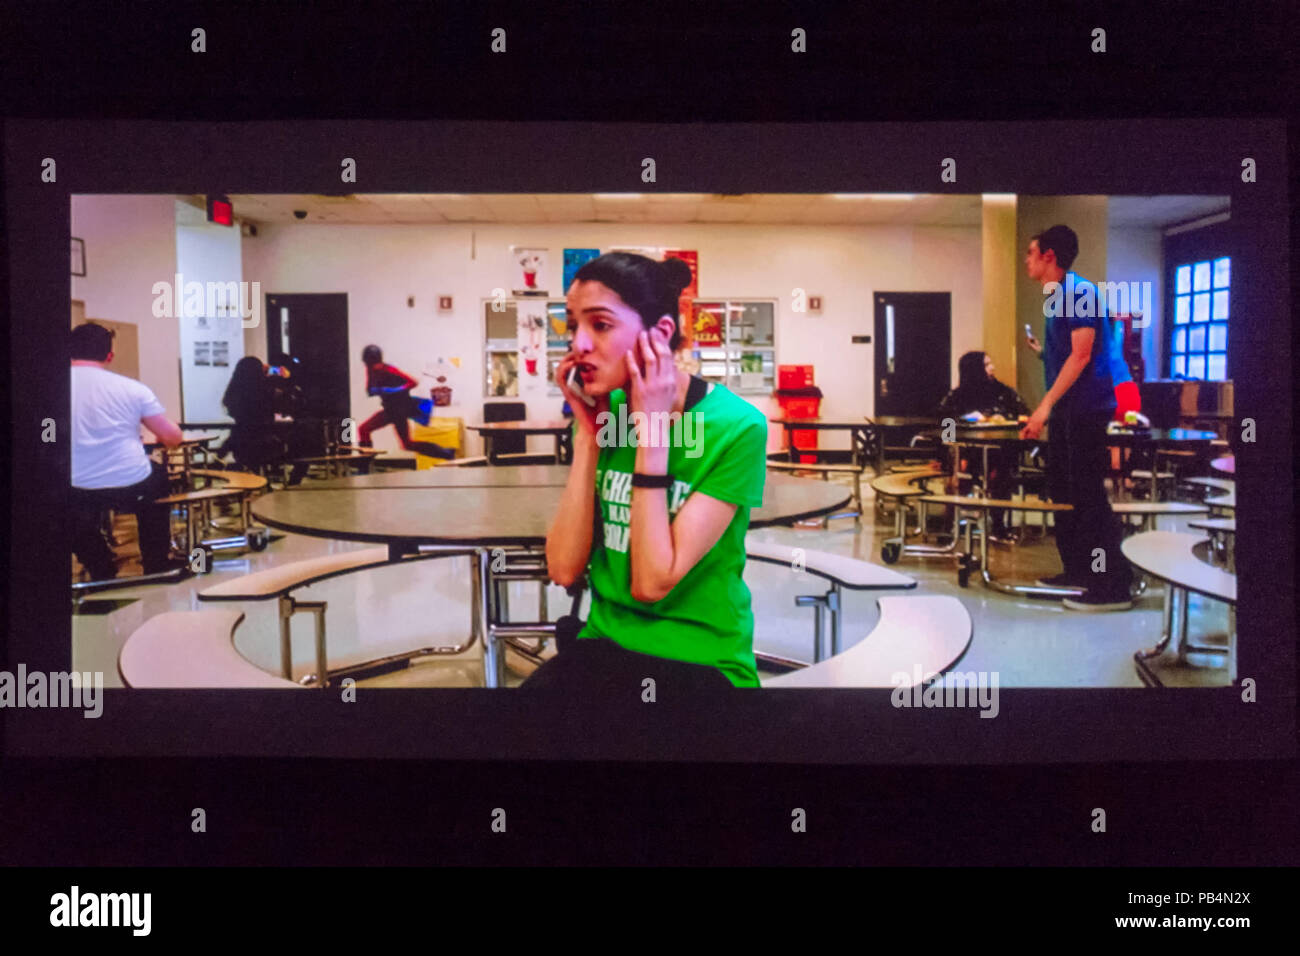 Bellmore, New York, USA. July 18, 2018. In short film The Adventures of Penny Patterson, the title character, played by actor AJNA JAI, calls Steve, her boyfriend and lab partner, who isn't helping with their science fair project. Penny didn't notice Steve was superhero behind her in high school cafeteria. The comedy, sci-fi, woman directed film was nominated for Best Student Film at LIIFE 2018, the Long Island International Film Expo. Stock Photo